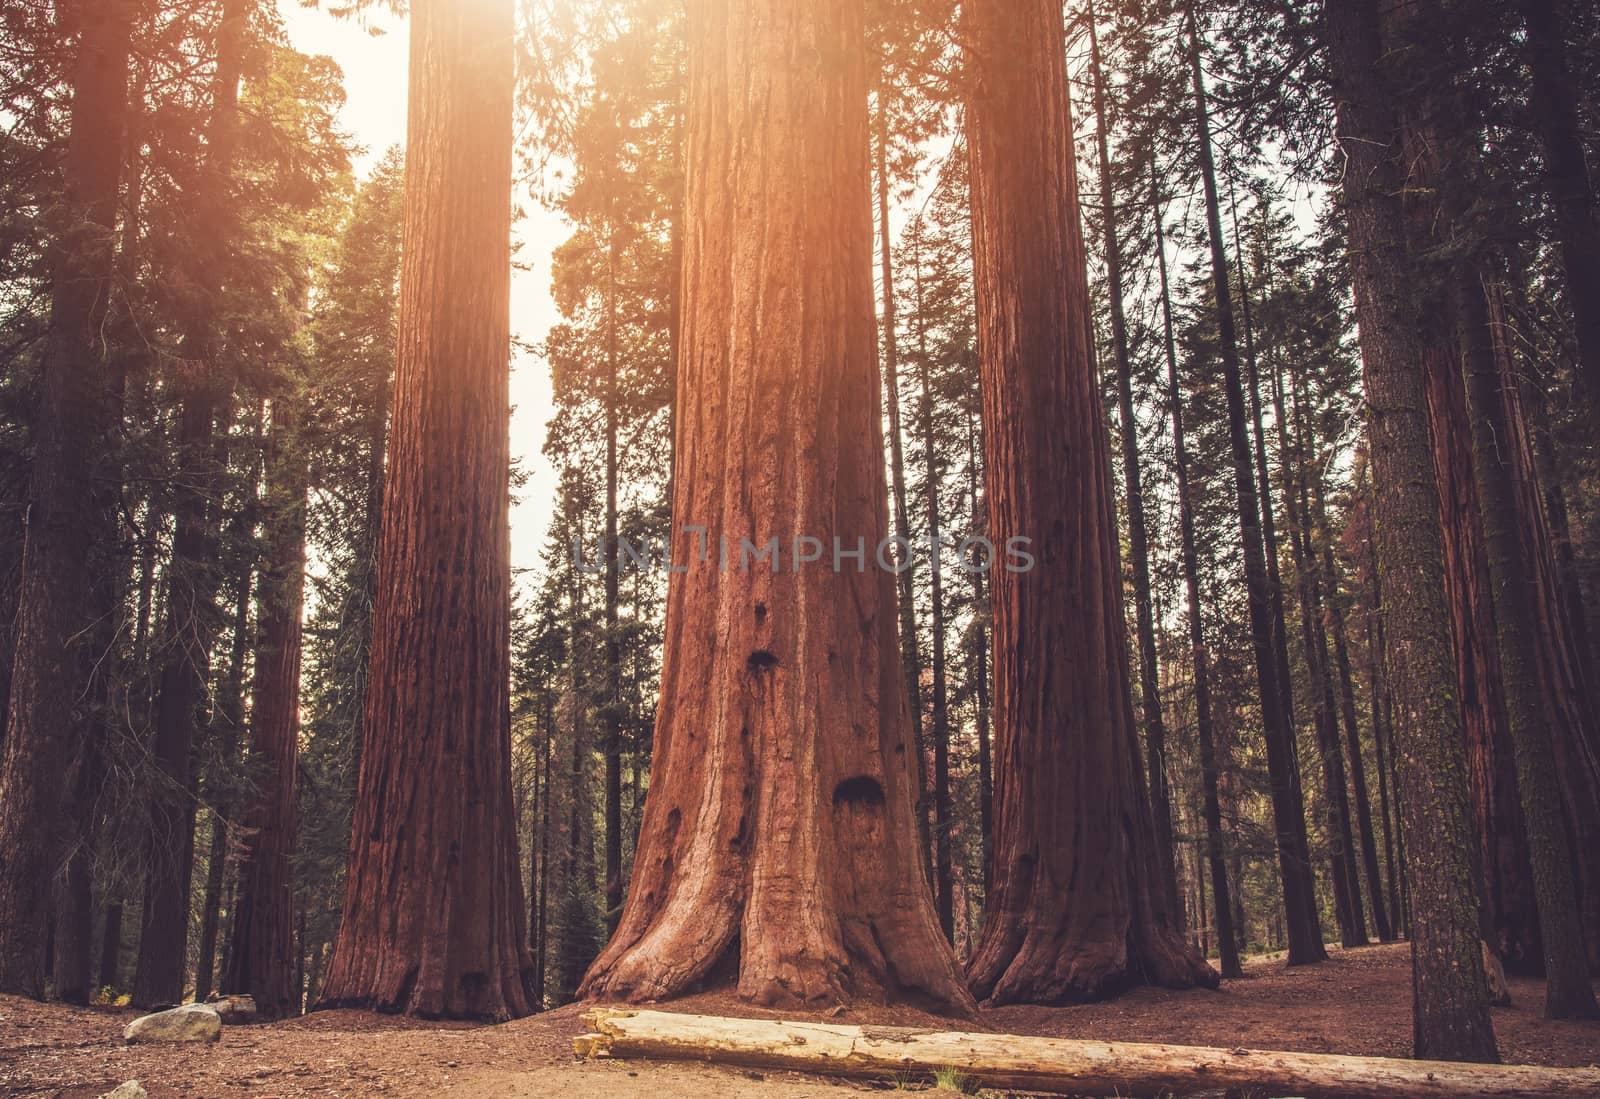 Giant Ancient Sequoias Woodland. Sierra Nevada World Famous Sequoias National Park. California, United States of America.